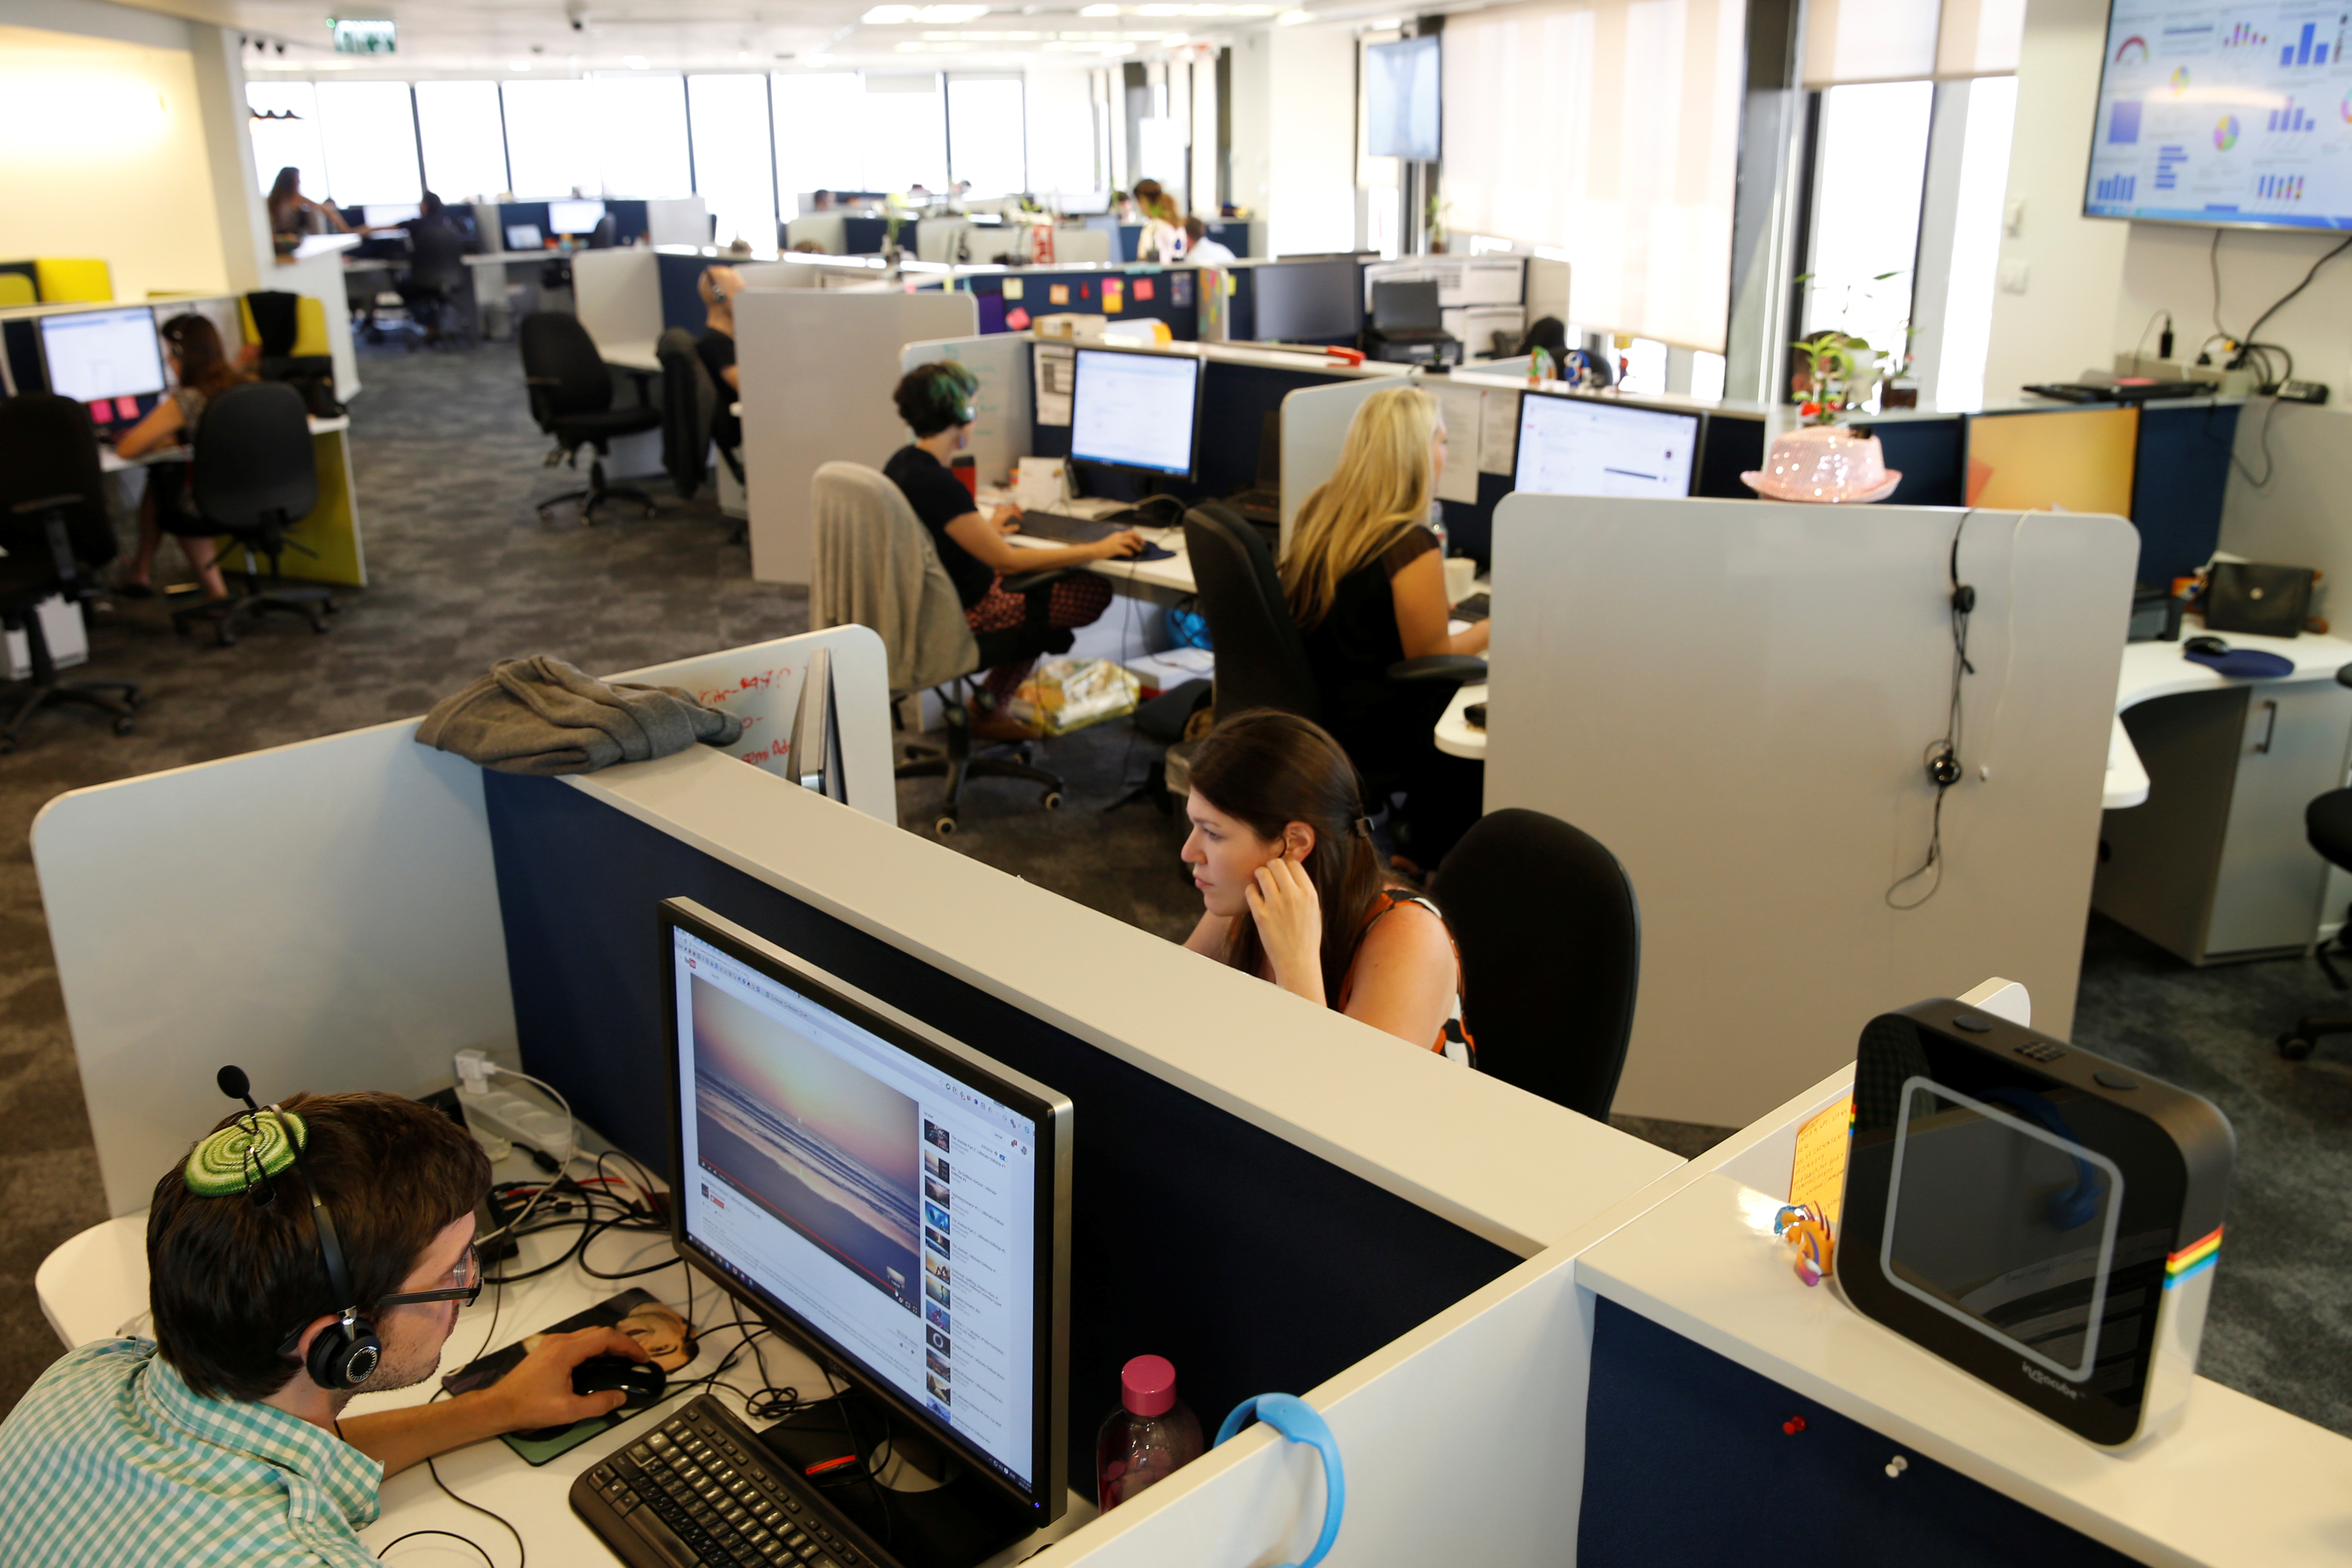 Employees work at Internet data firm SimilarWeb at their offices in Tel Aviv, Israel